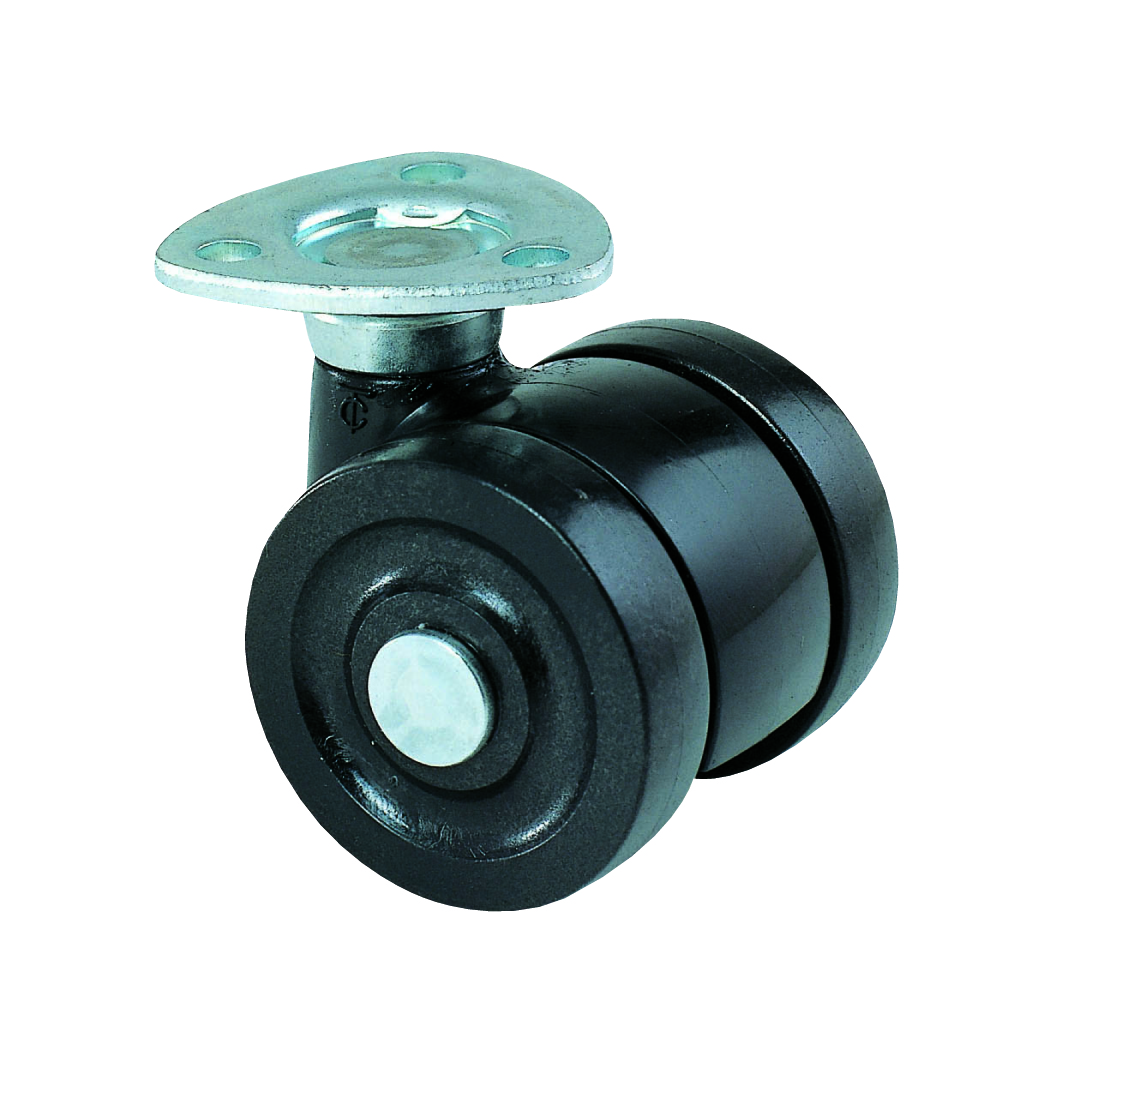 Casters - With swivel plate, reinforced plastic double caster, without brake, TX40/TX50 series. TX40F